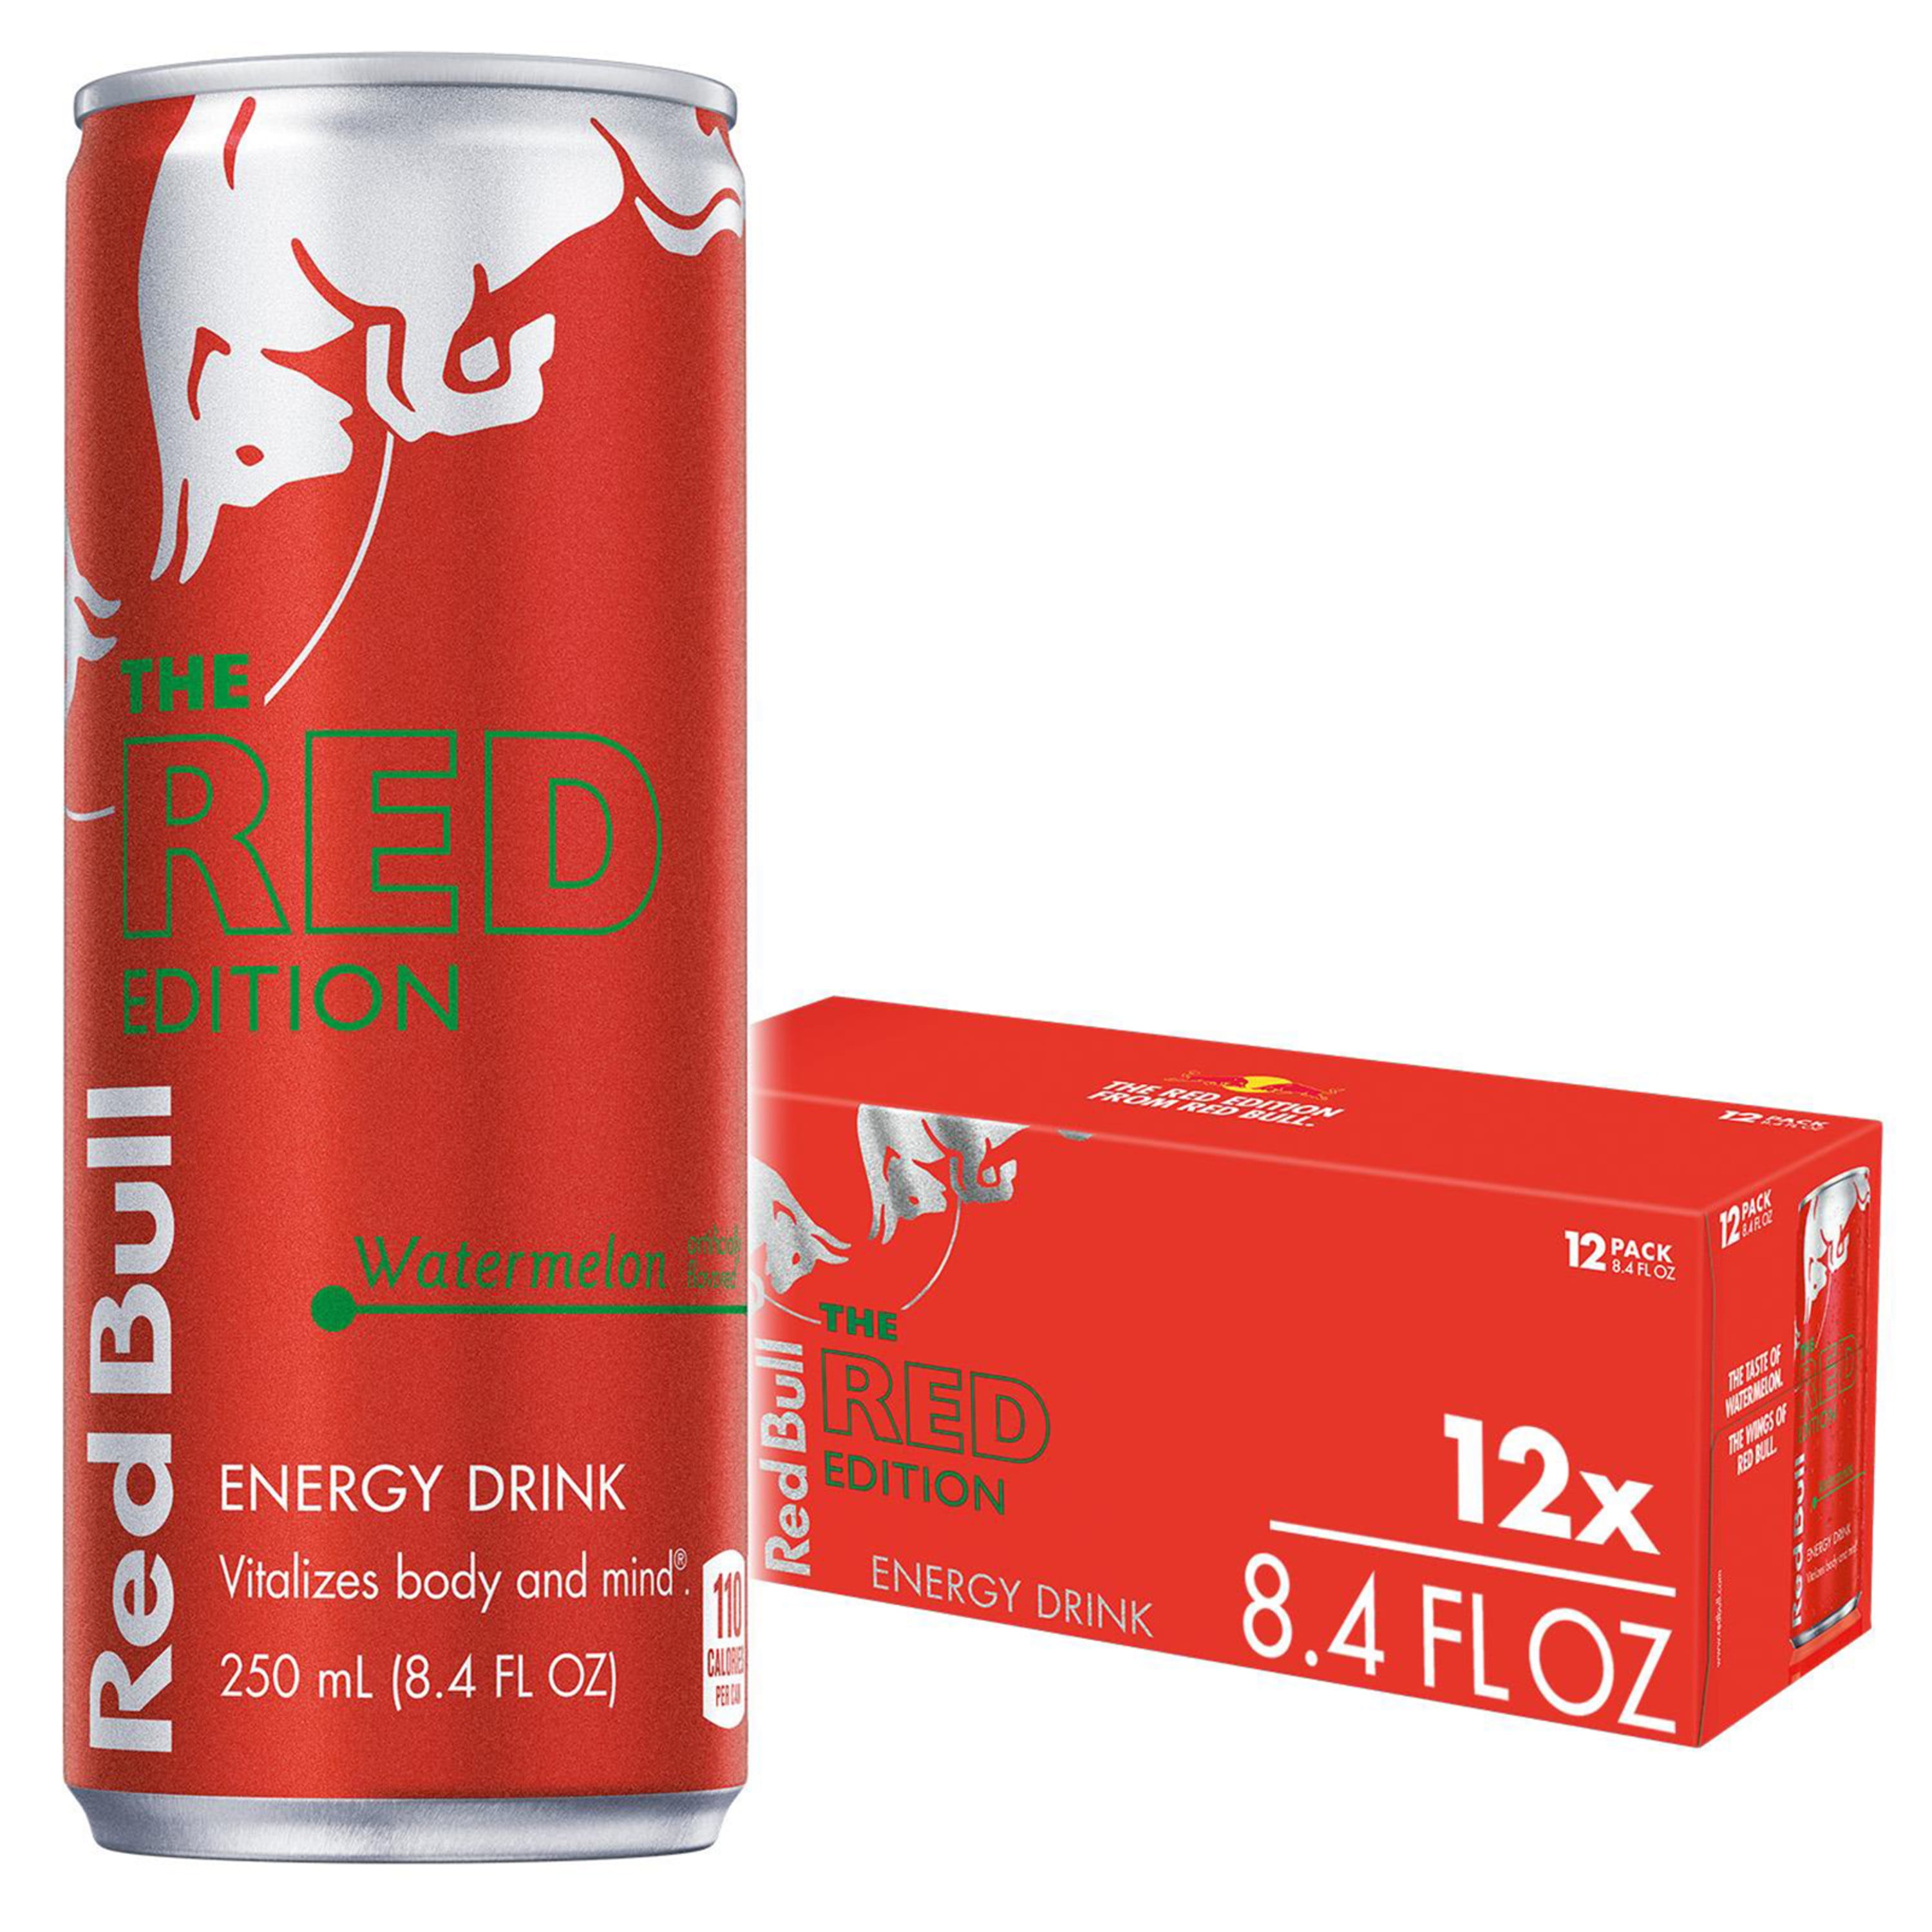 Red Red Edition Watermelon Energy Drink, 8.4 oz, Pack of 12 - Walmart.com